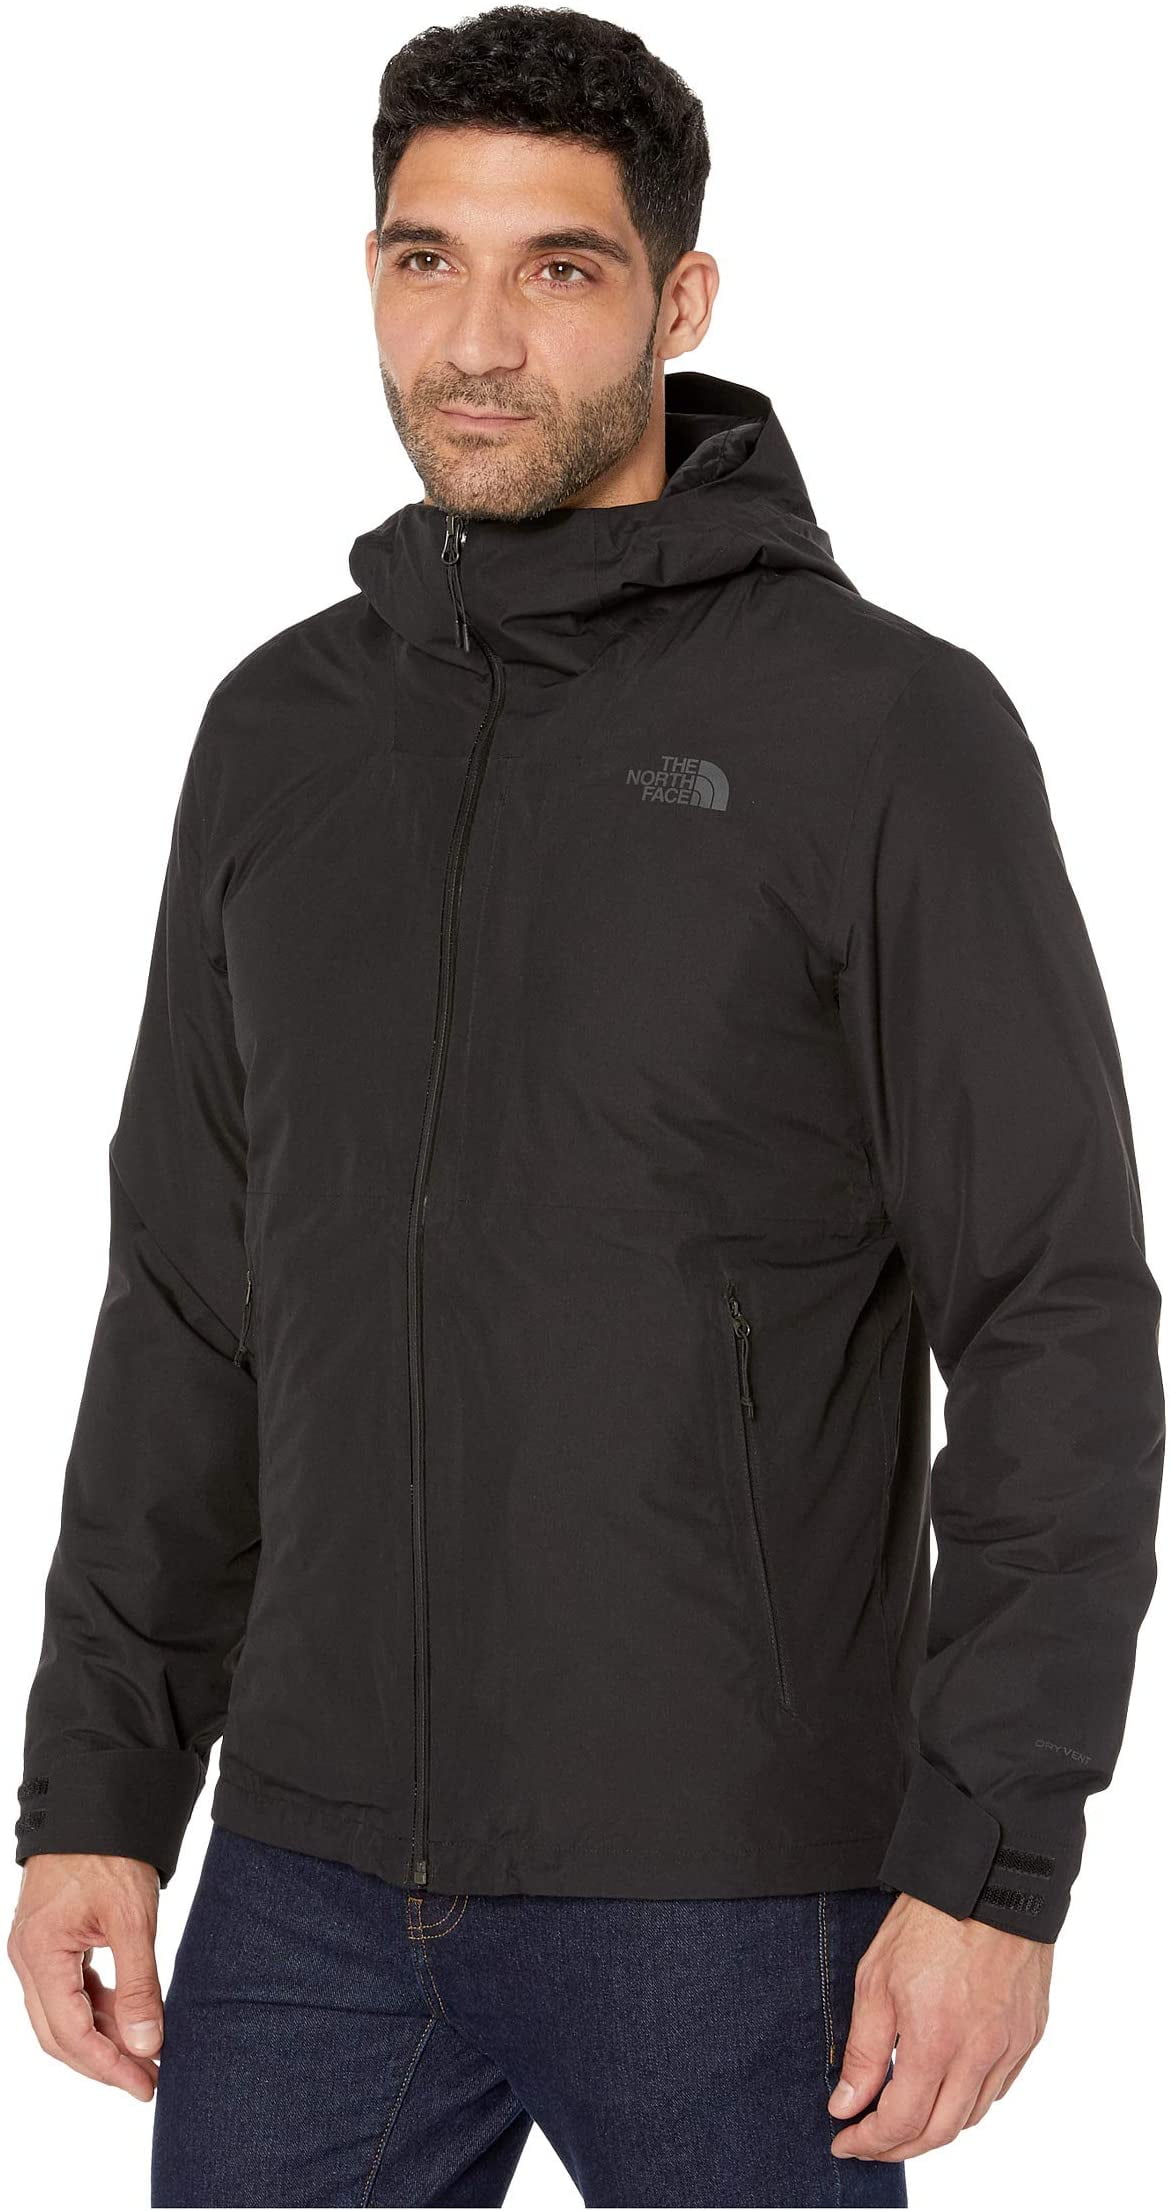 the north face men's inlux